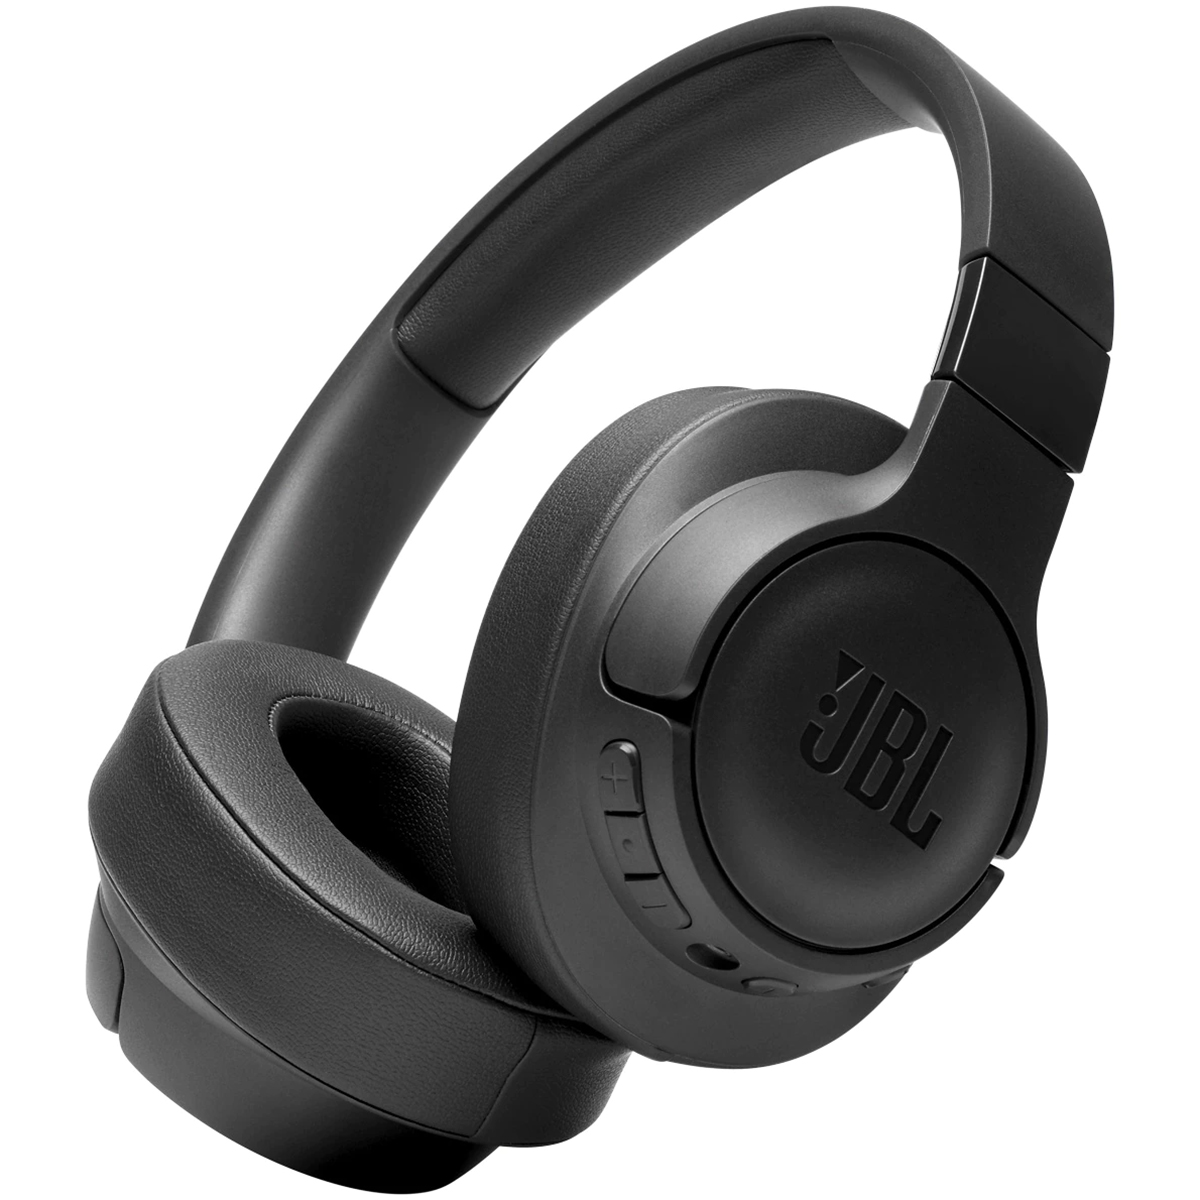 Casti Over The Ear Jbl Tune 760nc, Bluetooth, Active Noise Cancelling, Pure Bass Sound, Baterie 35h, Microfon, Negru